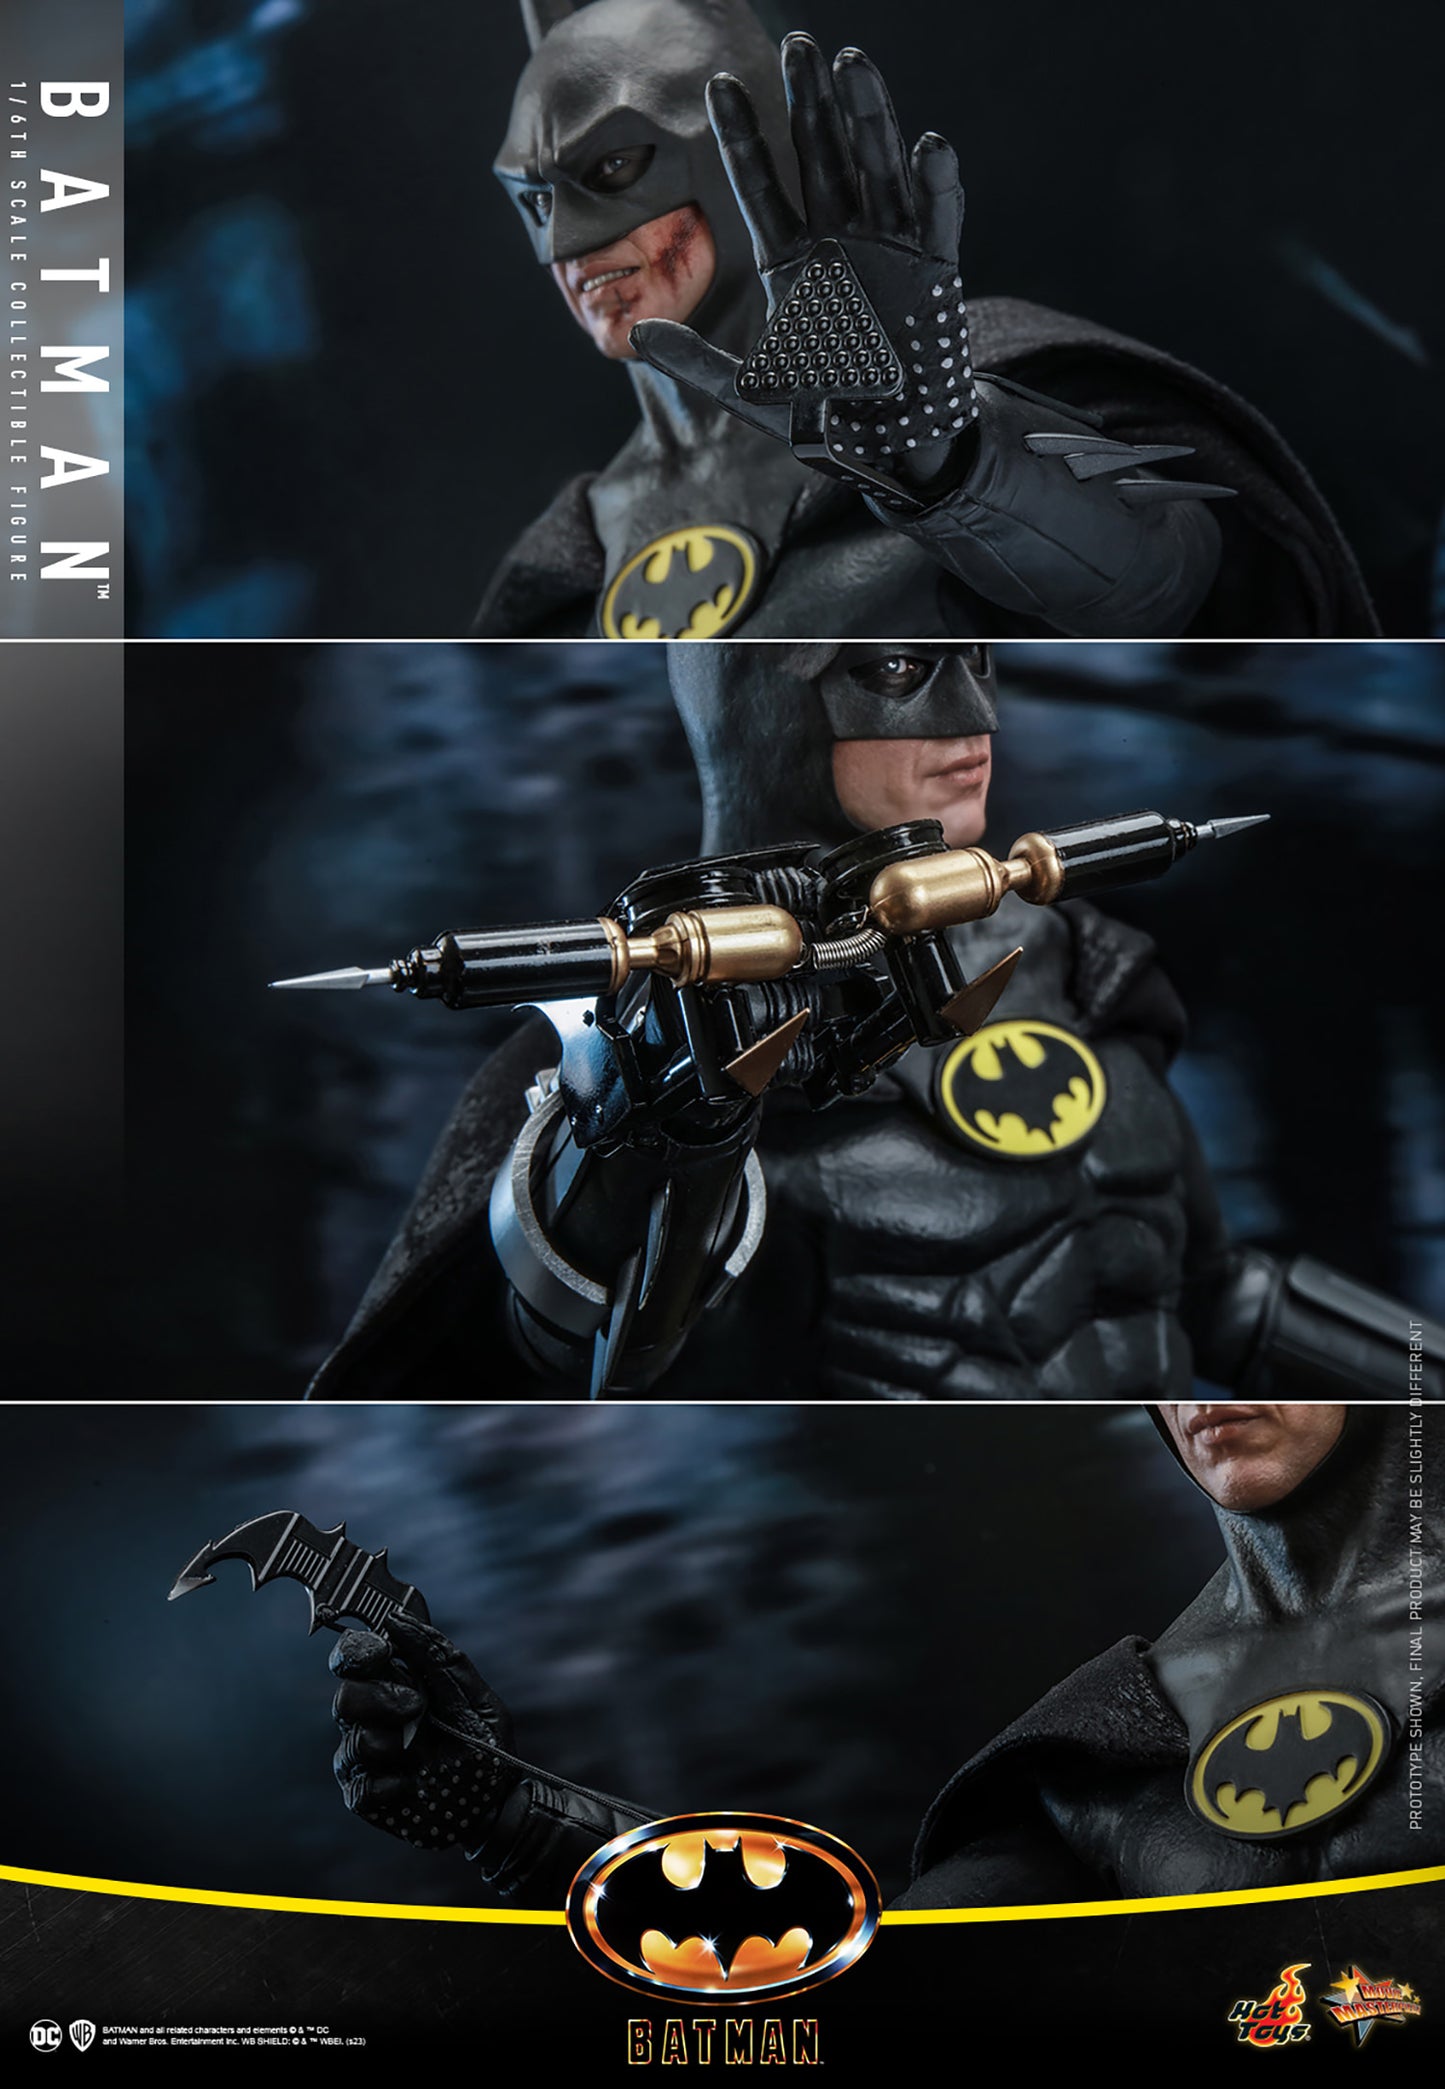 Batman Sixth Scale Figure by Hot Toys